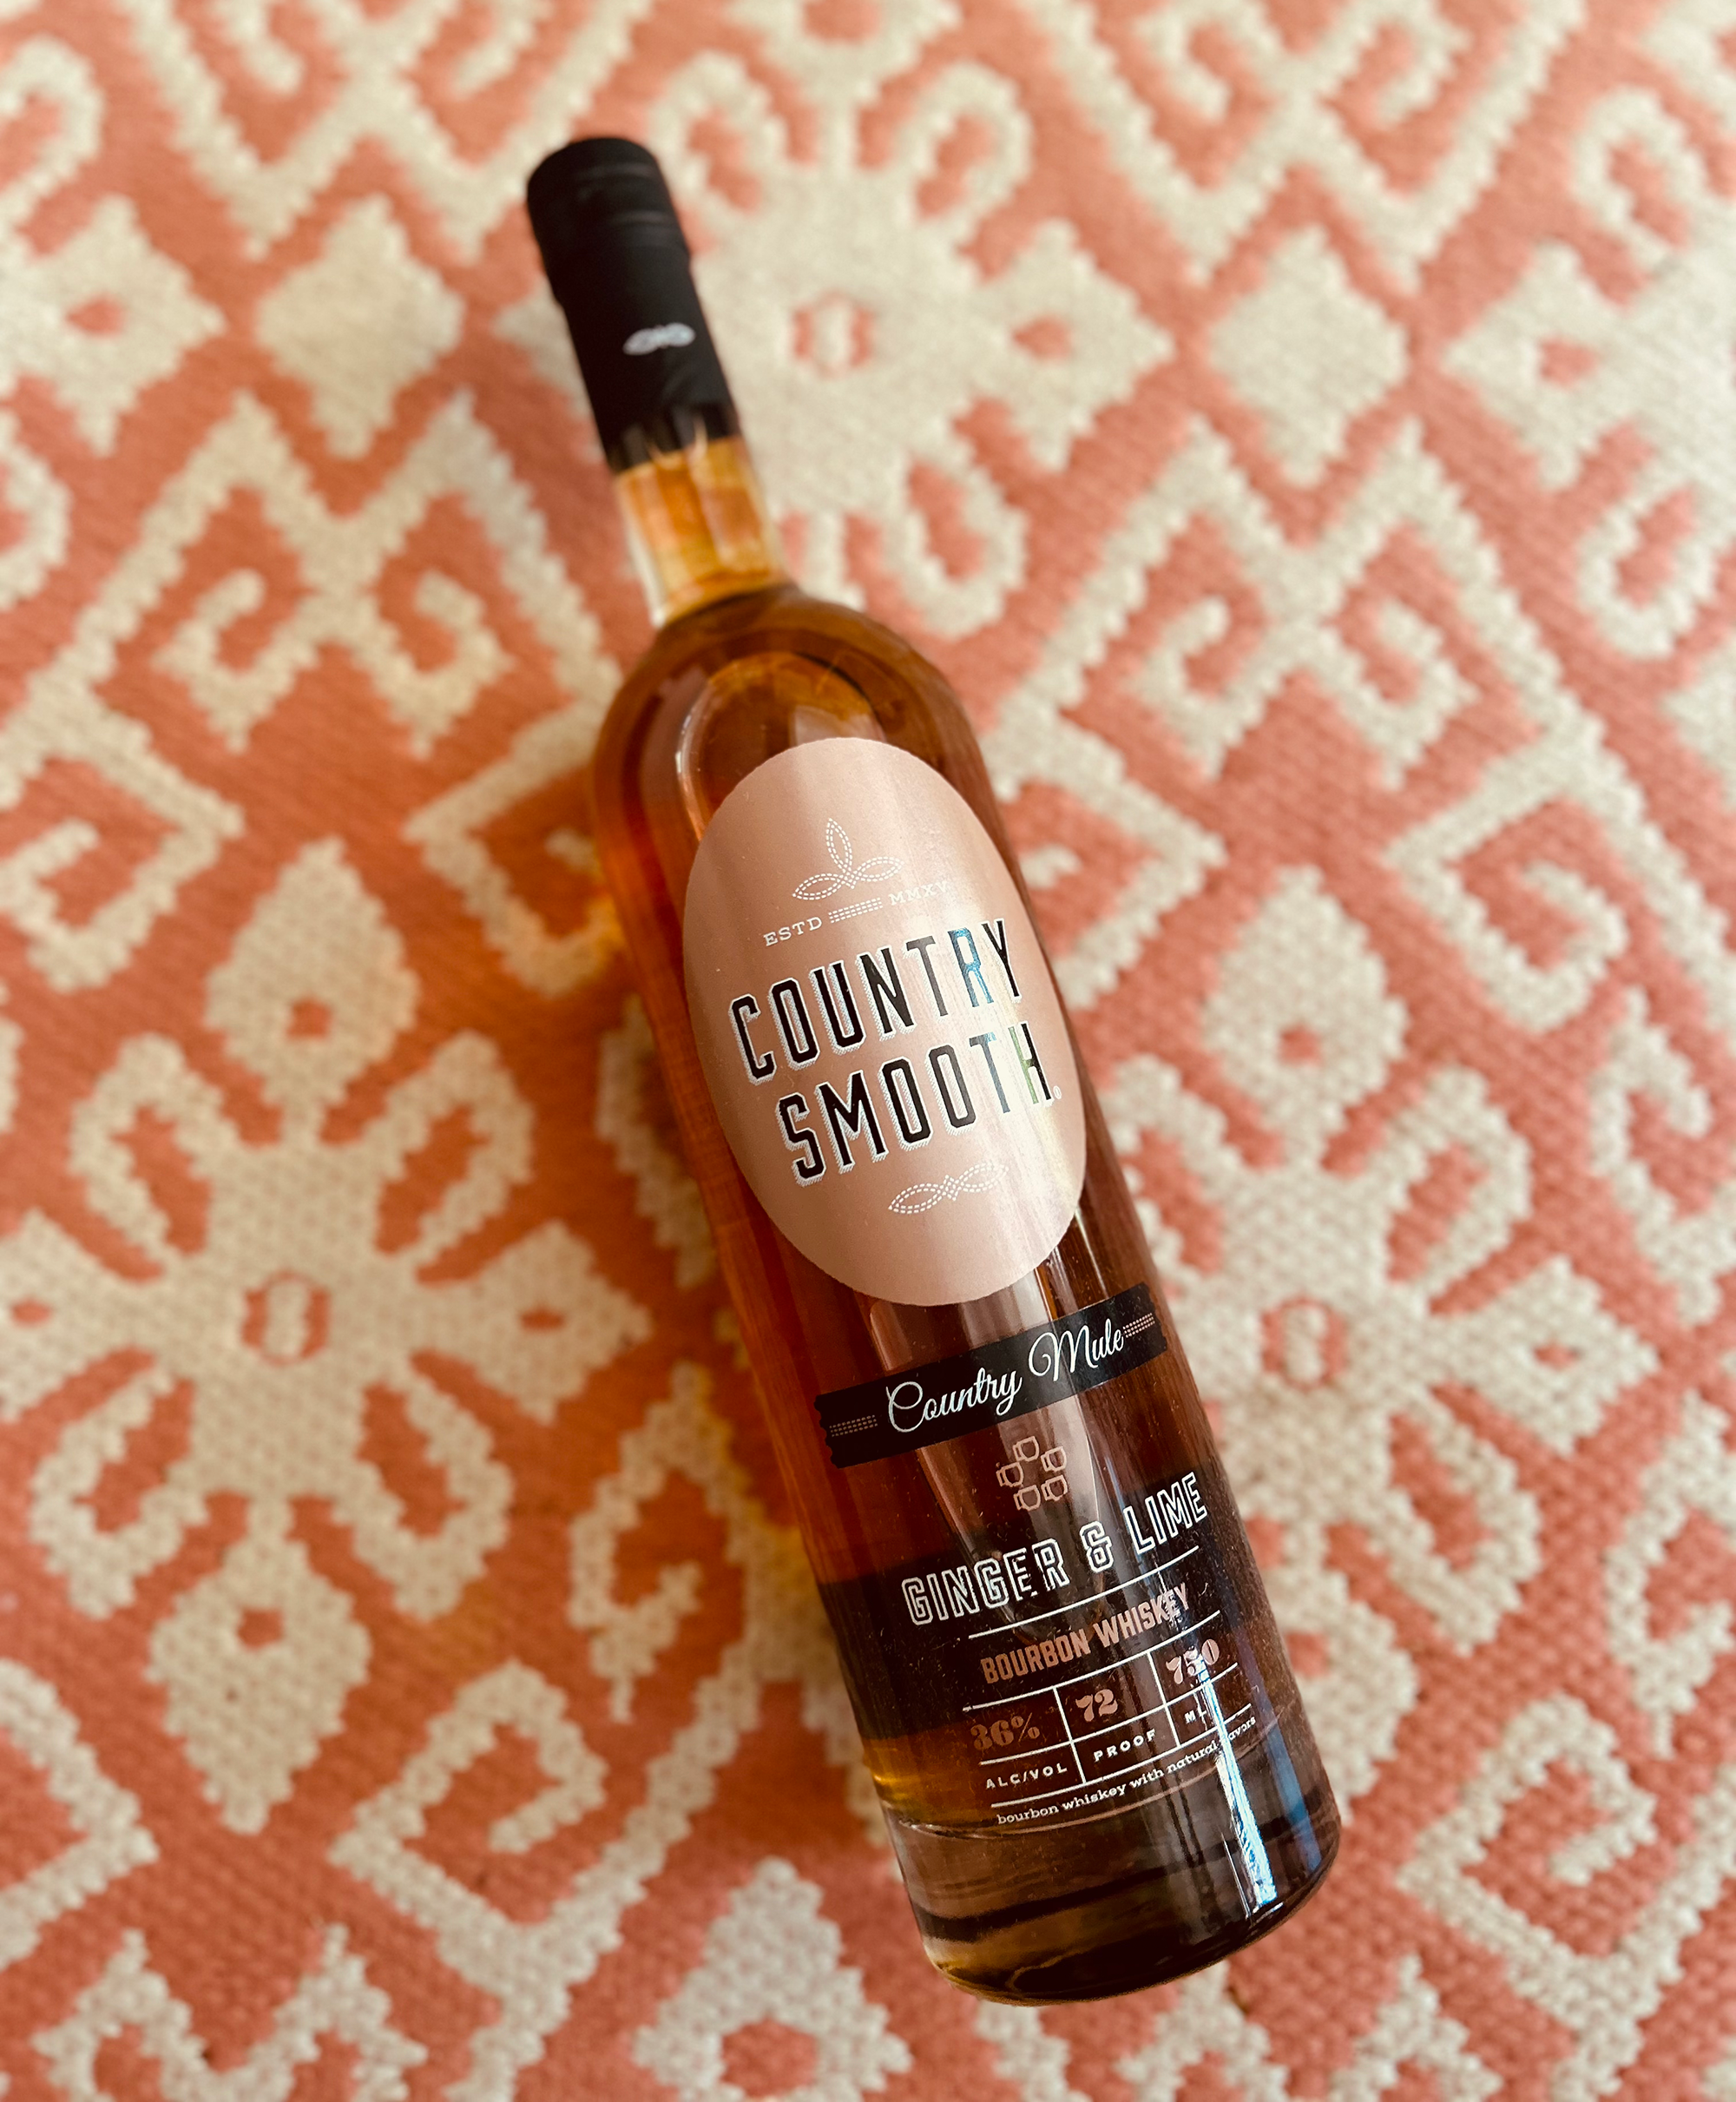 Country Smooth Bourbon